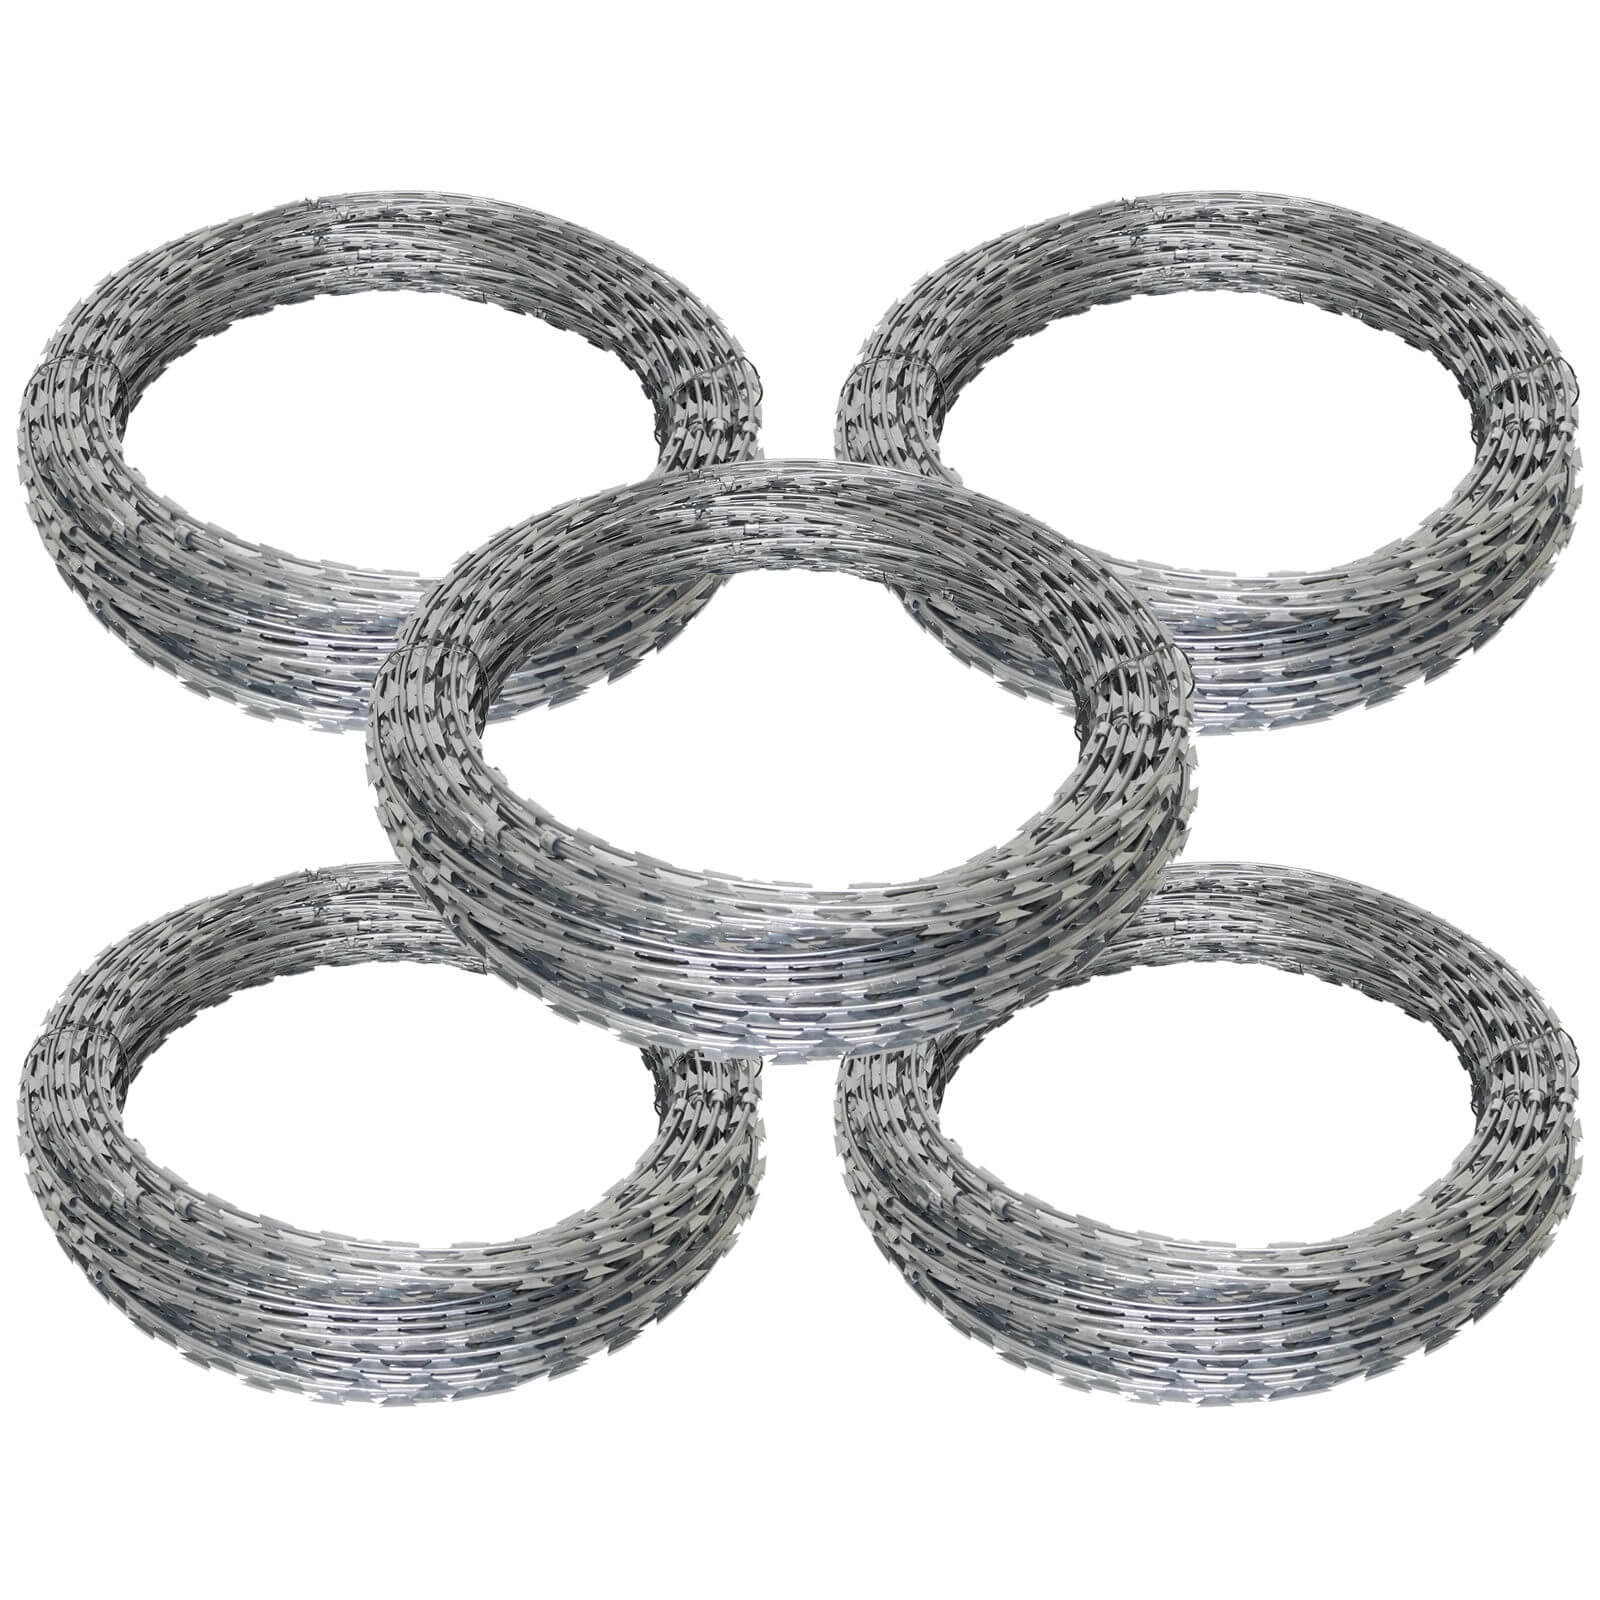 Razor wire fencing: the key to a secure environment